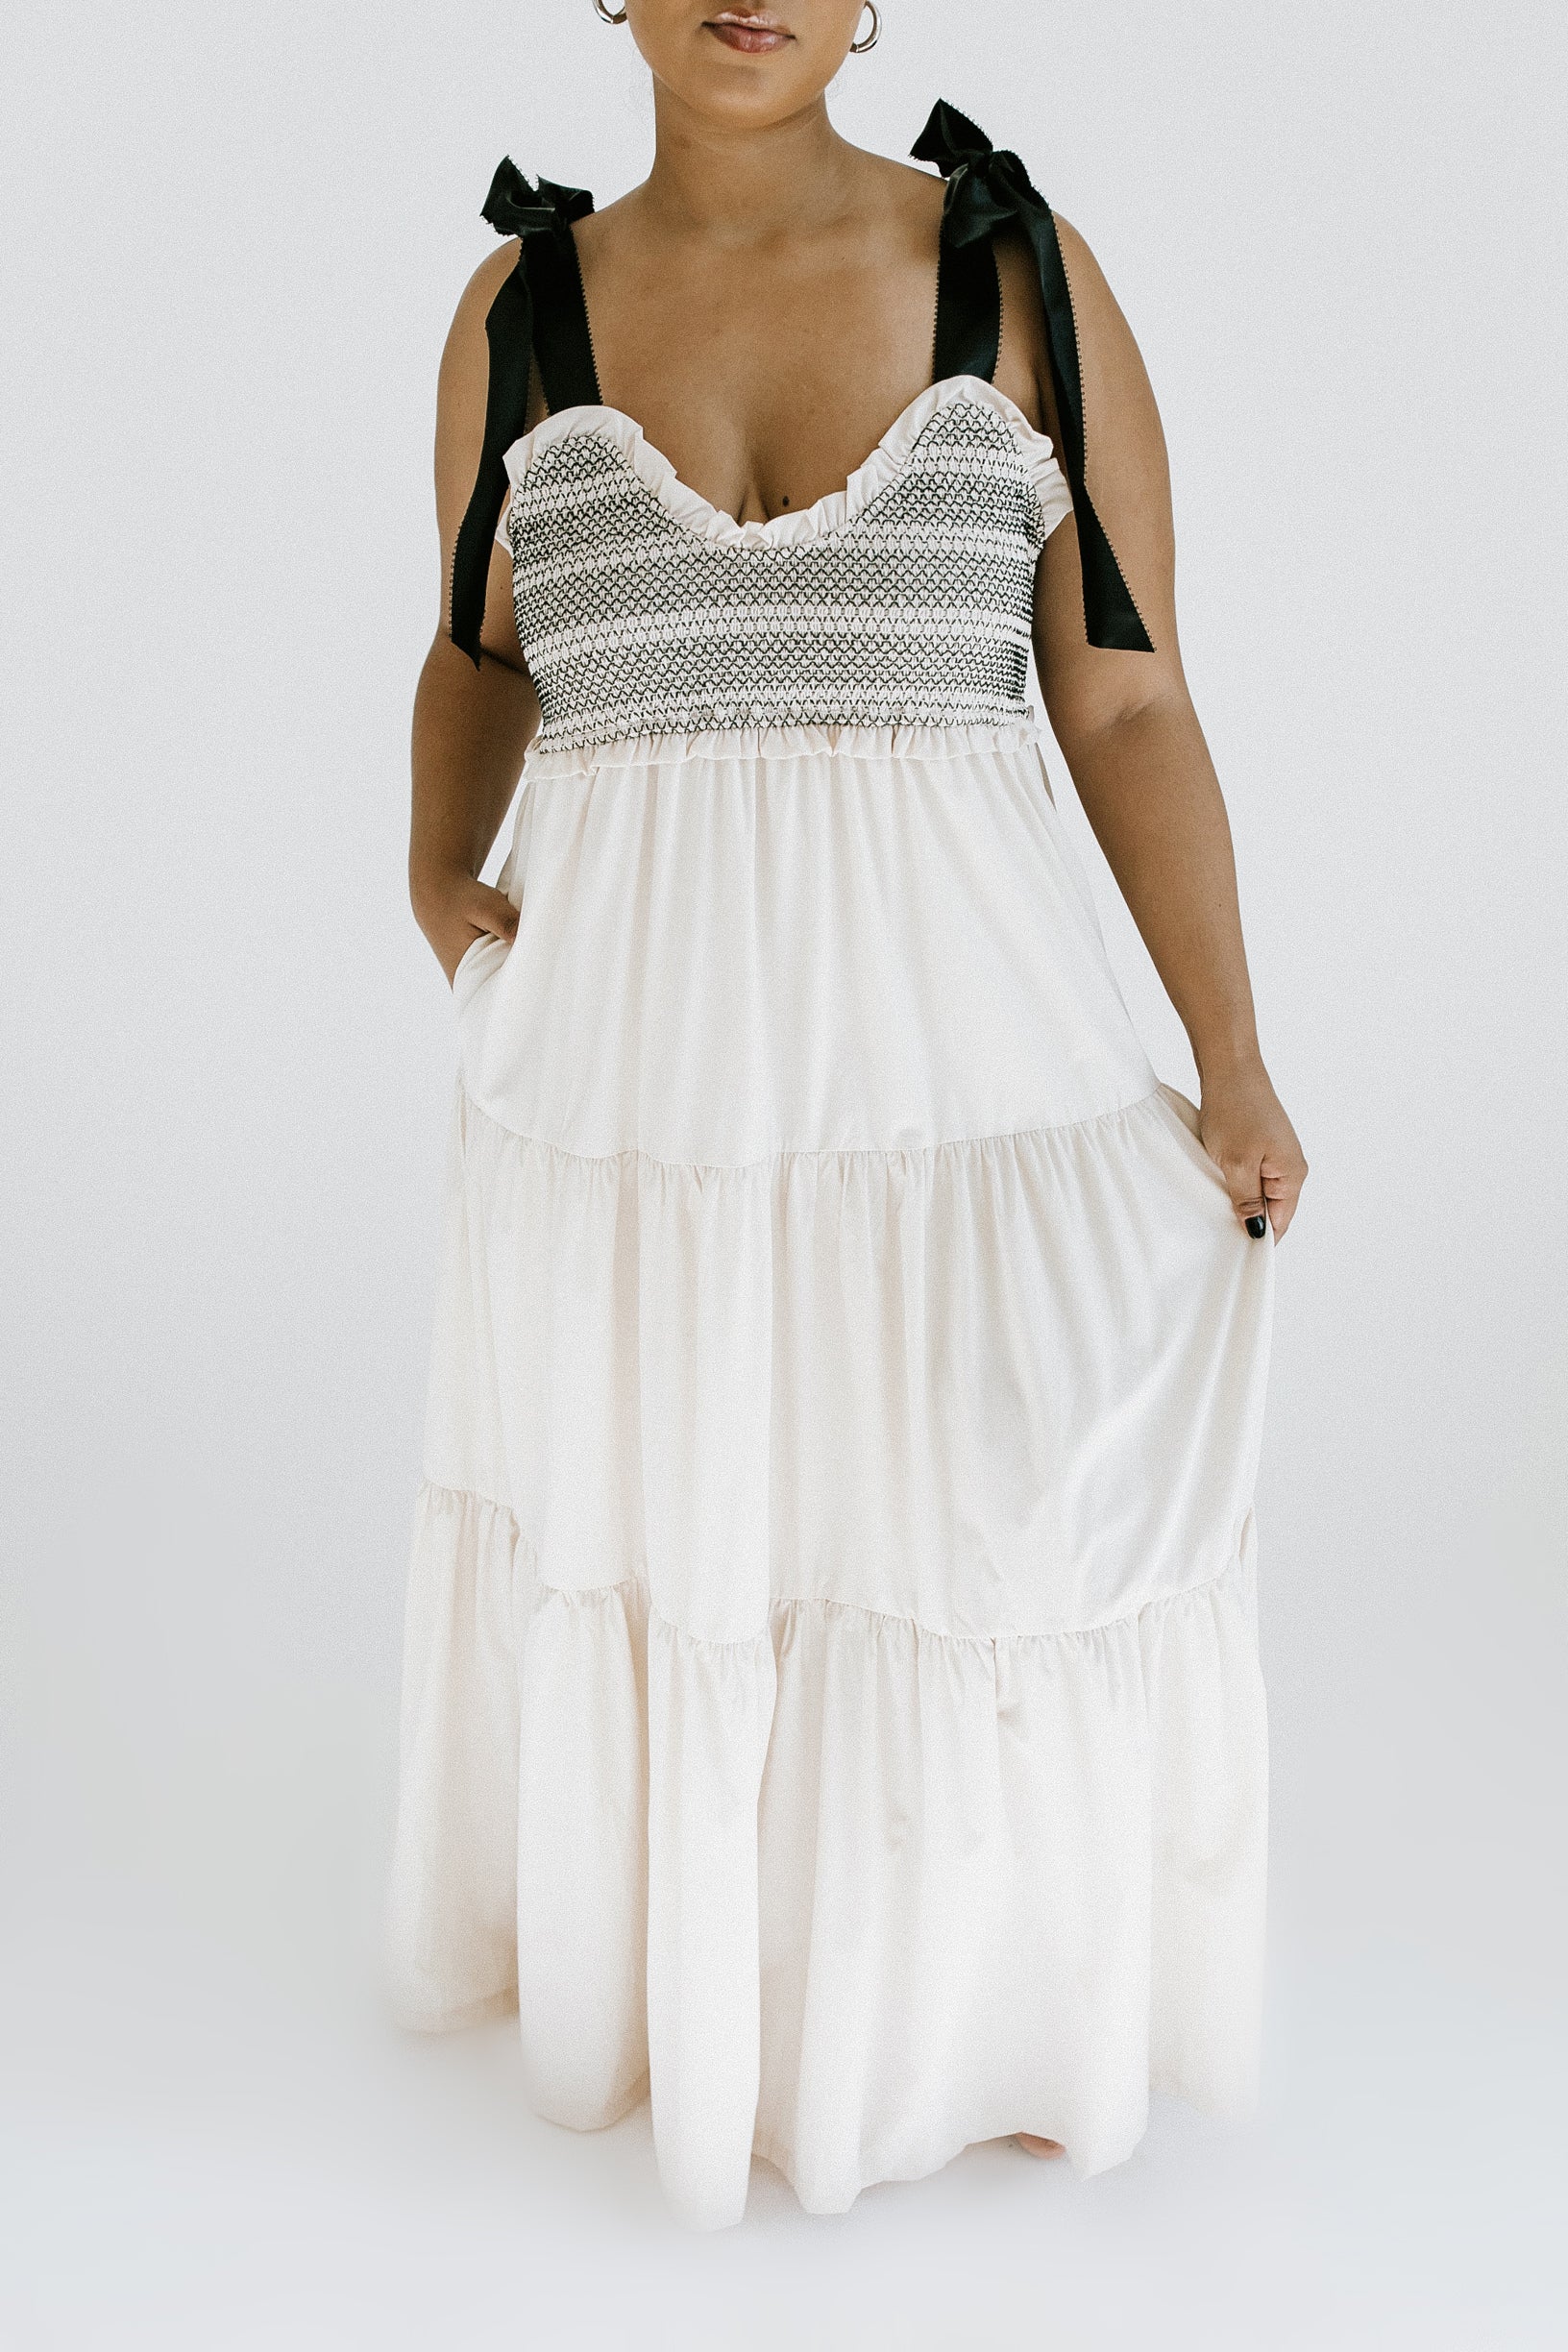 After The Sun Maxi Dress - Beige - More Sizes